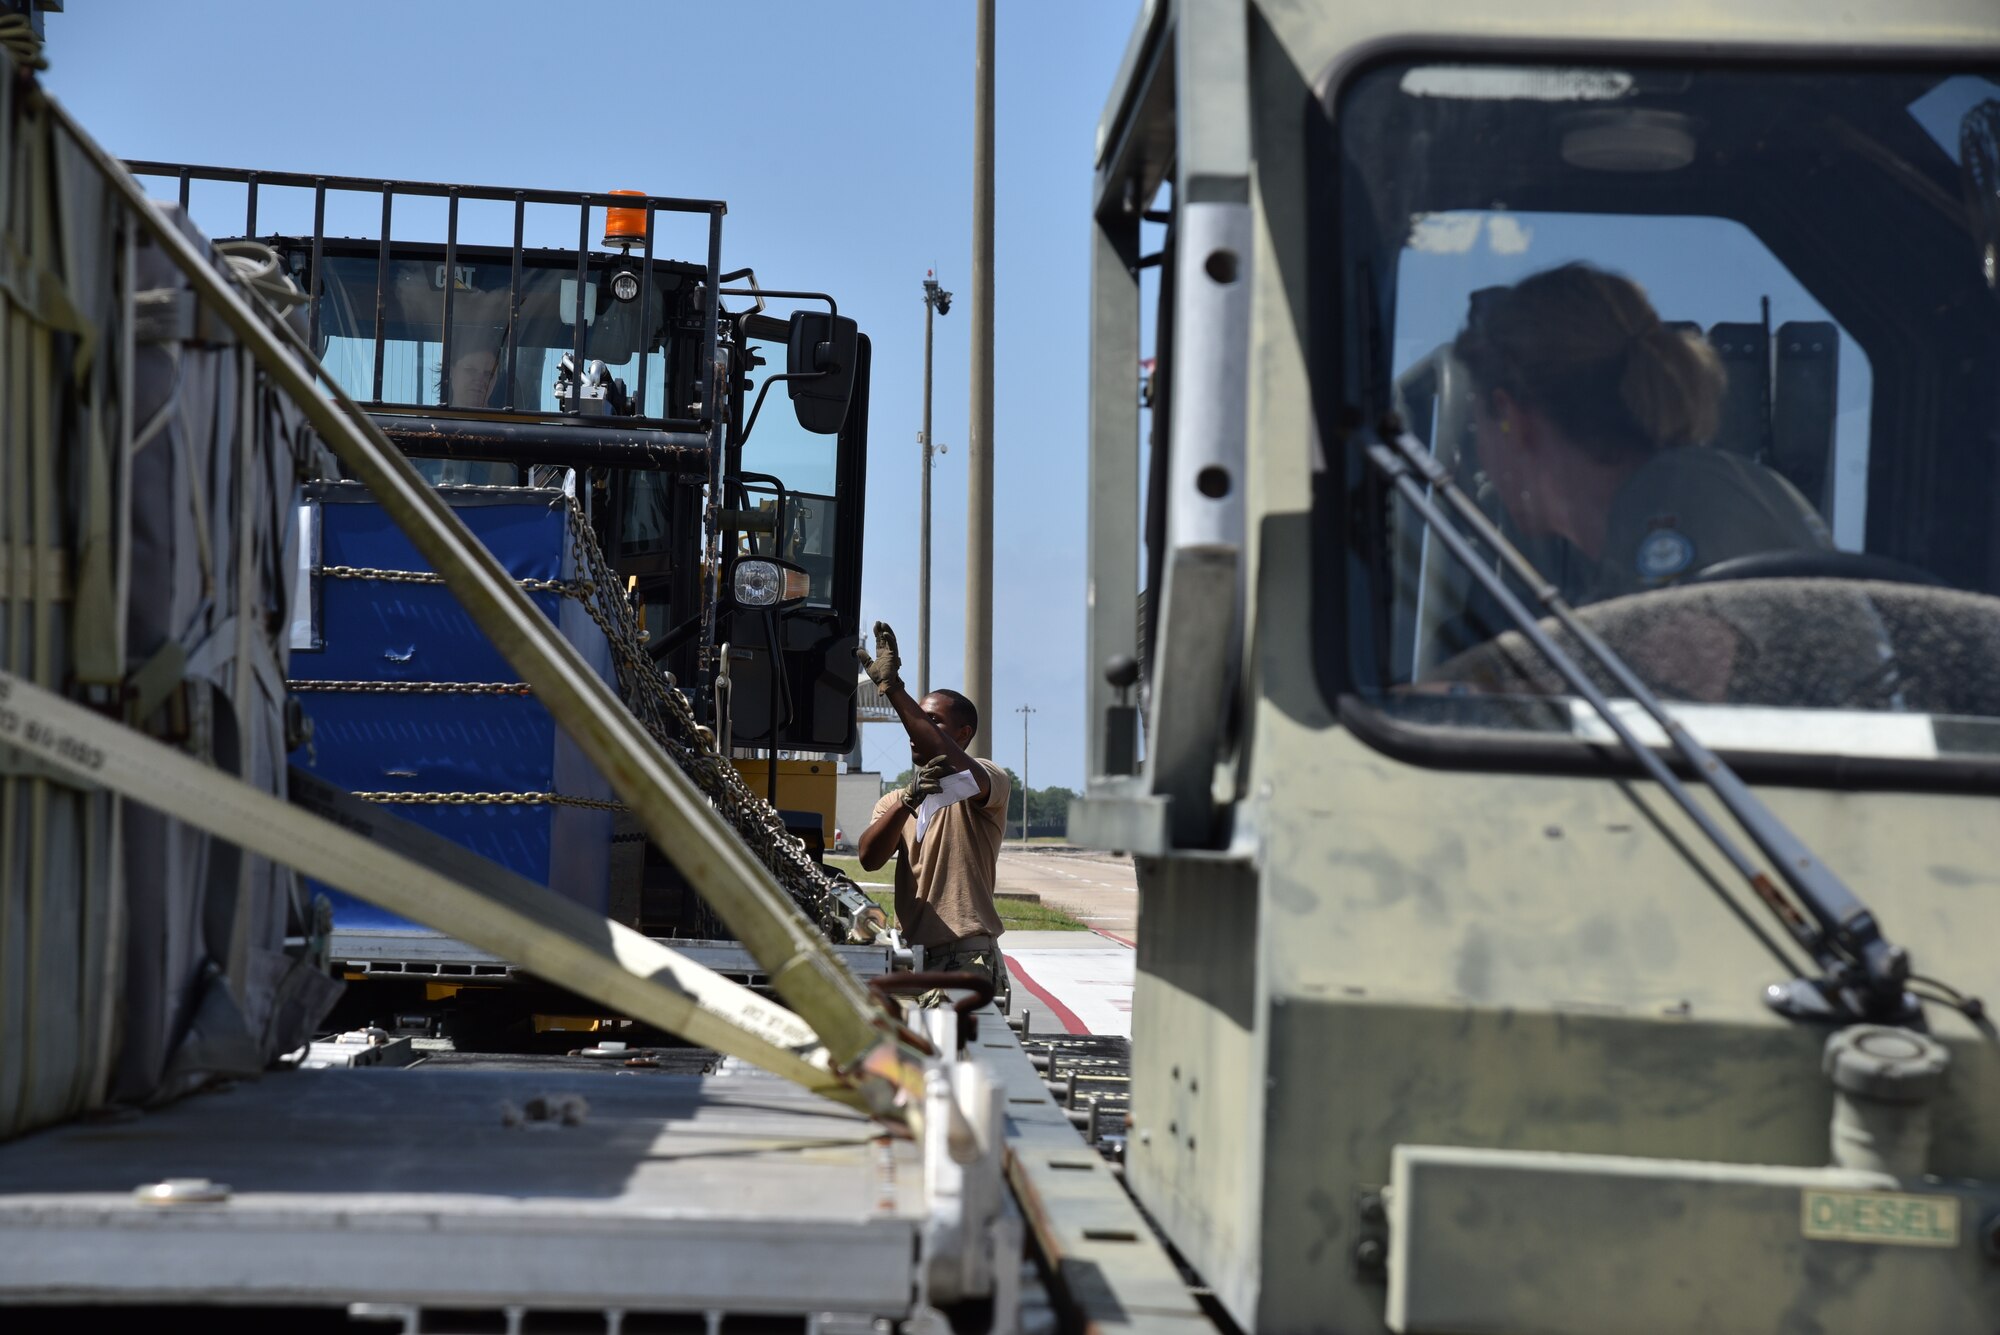 British Royal Air Force Reserve member watches from the seat of the K-loader, while U.S. Air Force Reserve member marshals the driver of the all terrain 10K forklift to put the pallet on the K-Loader.